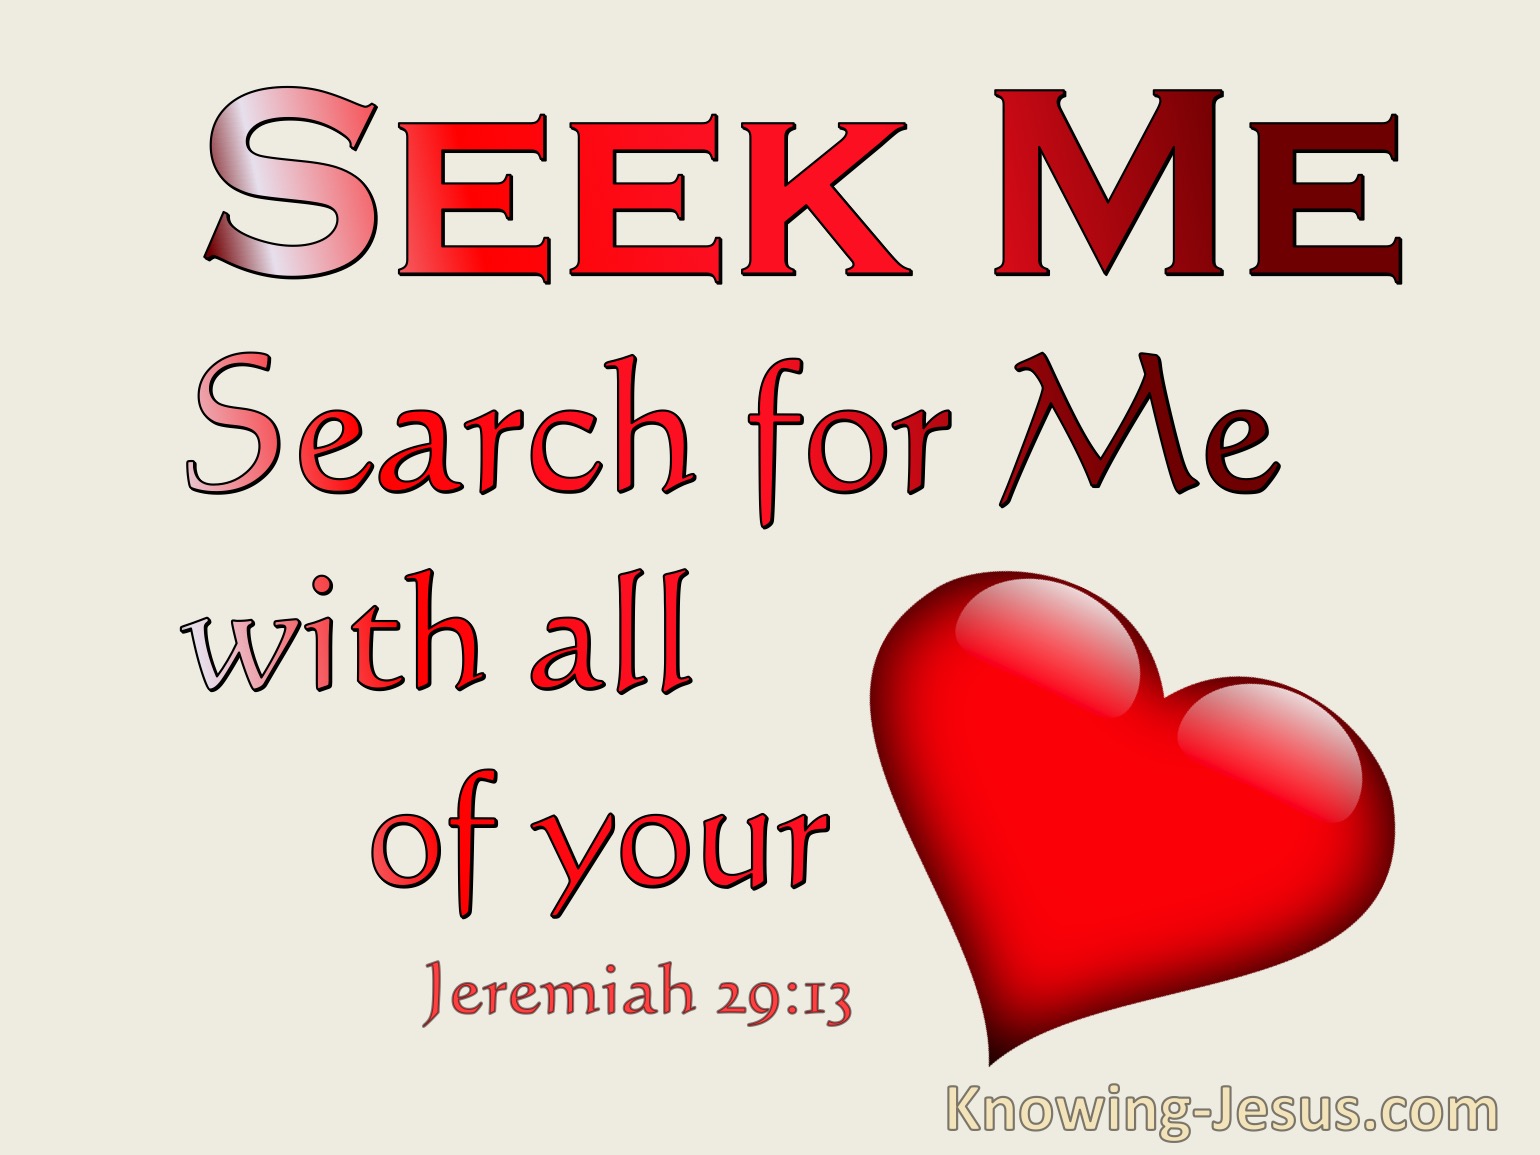 What Does Jeremiah 29:13 Mean?